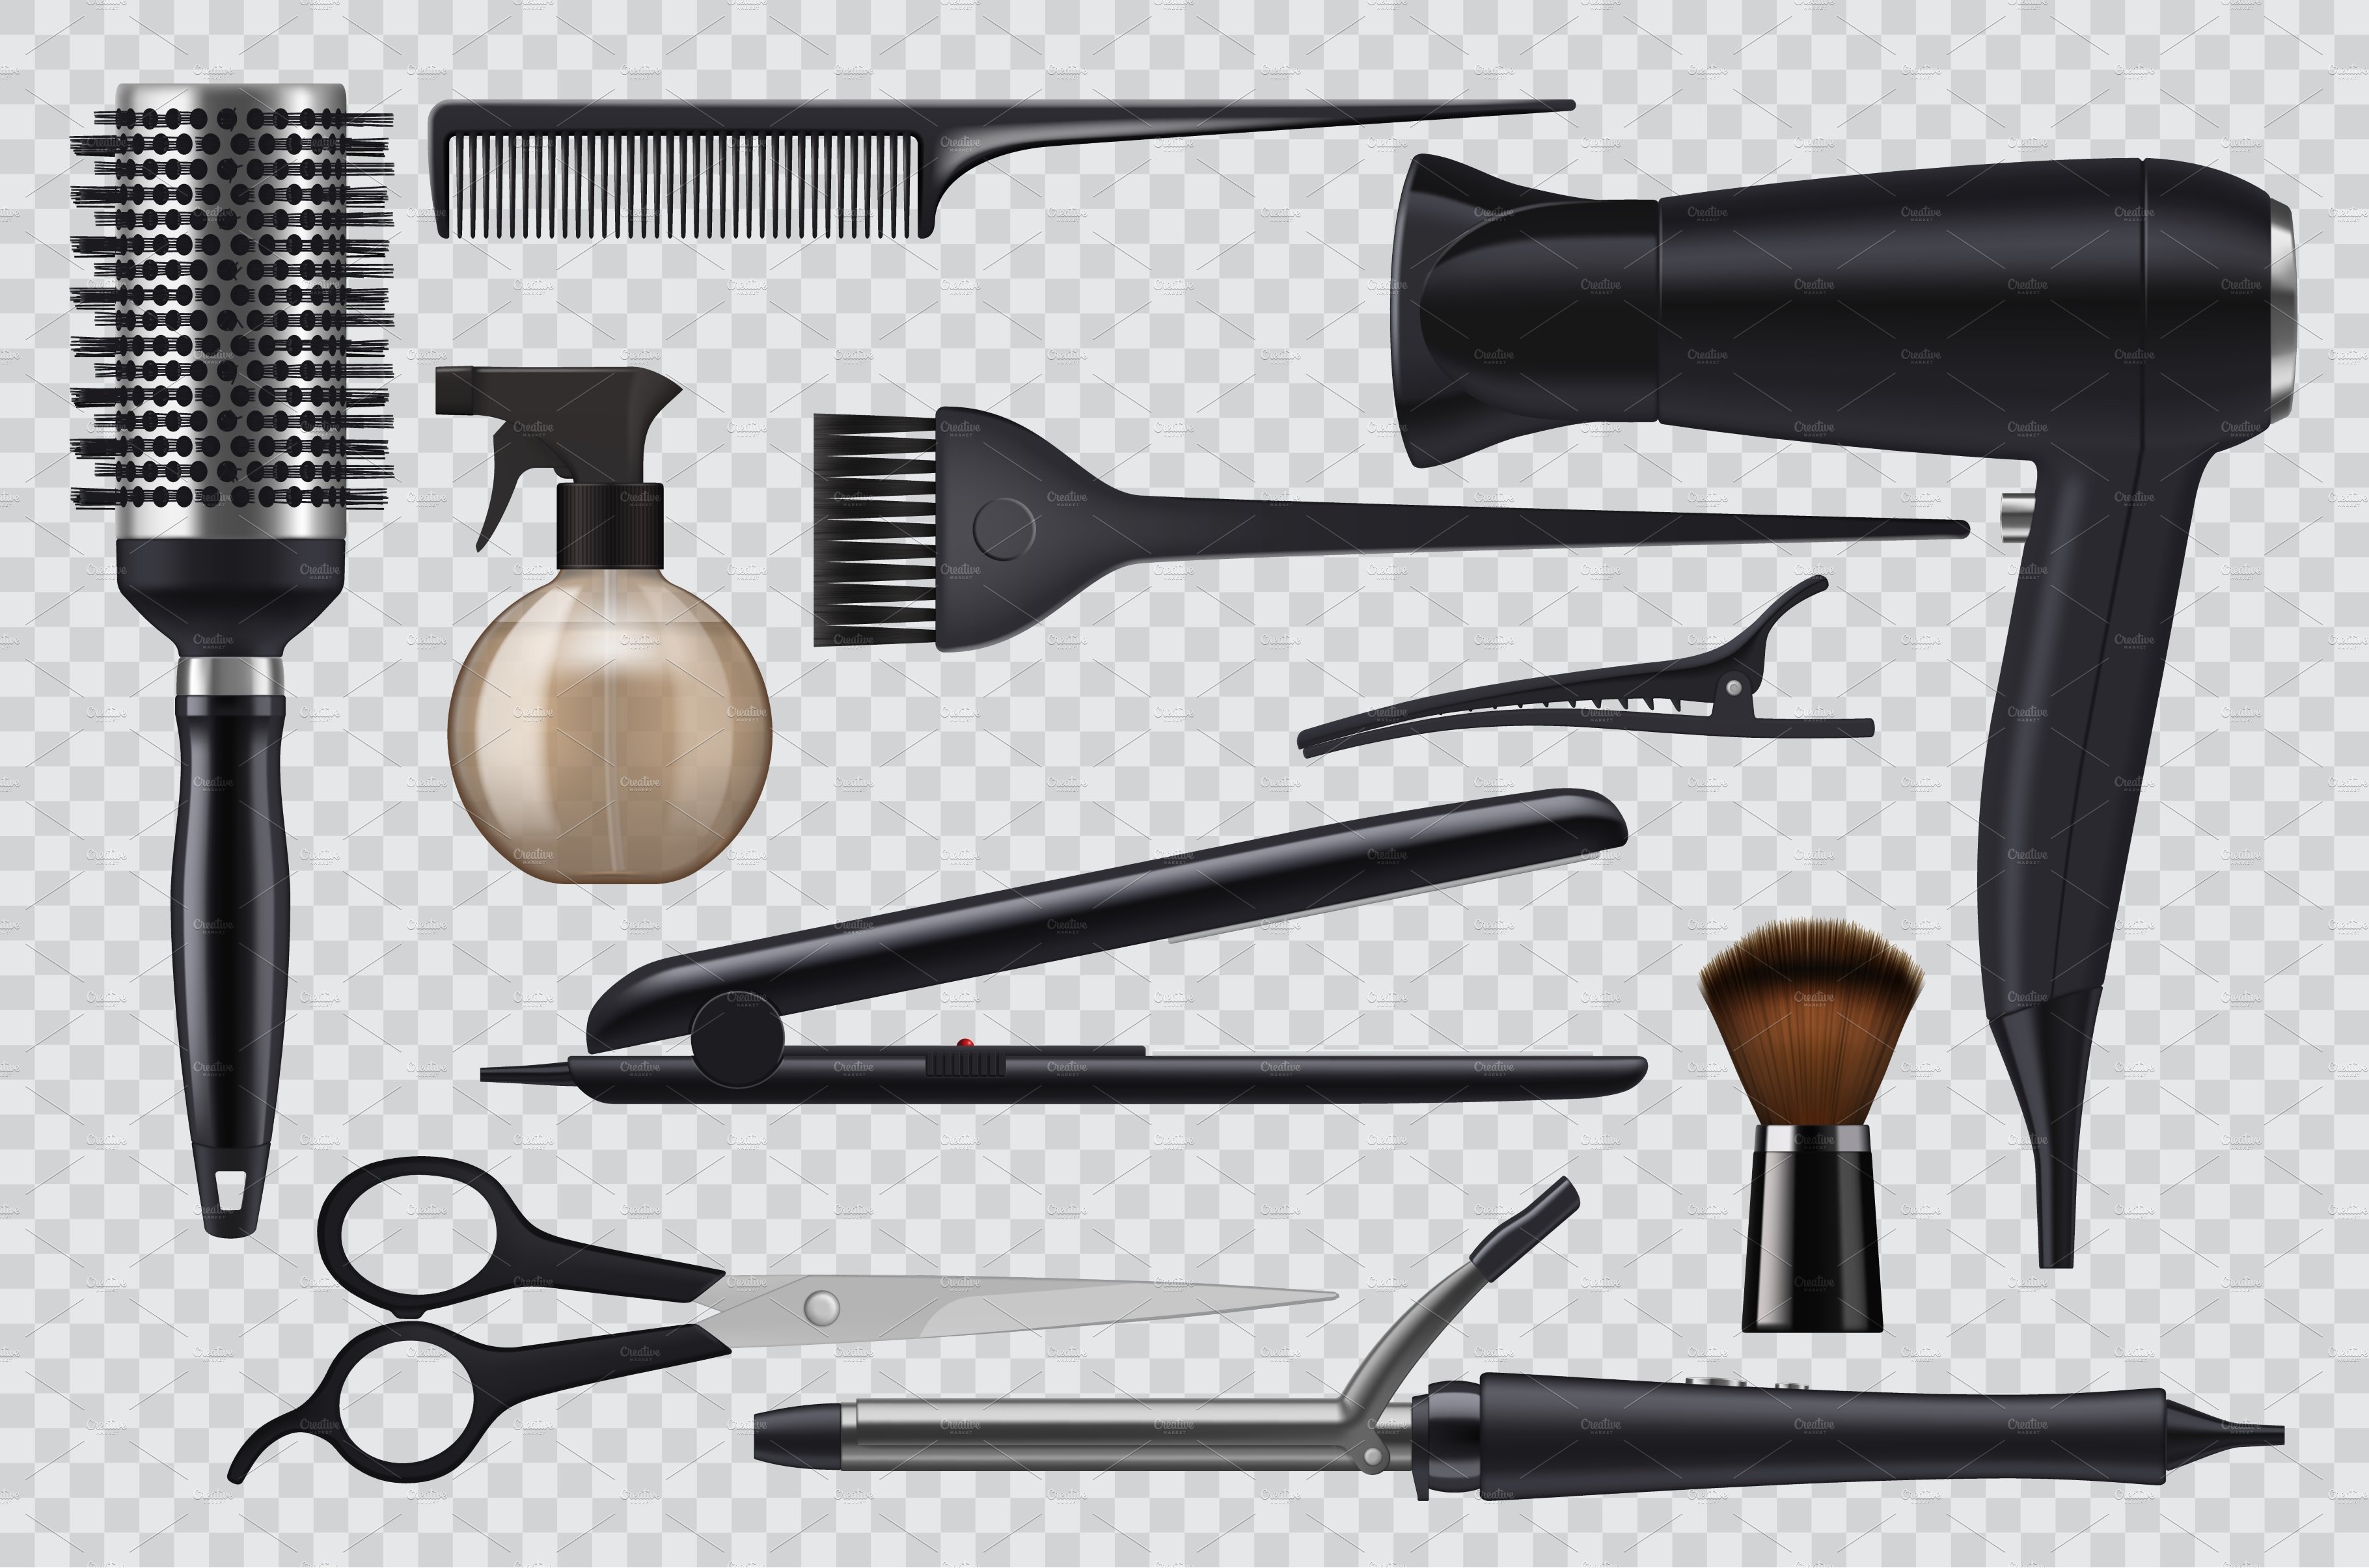 Realistic hairdresser tools cover image.